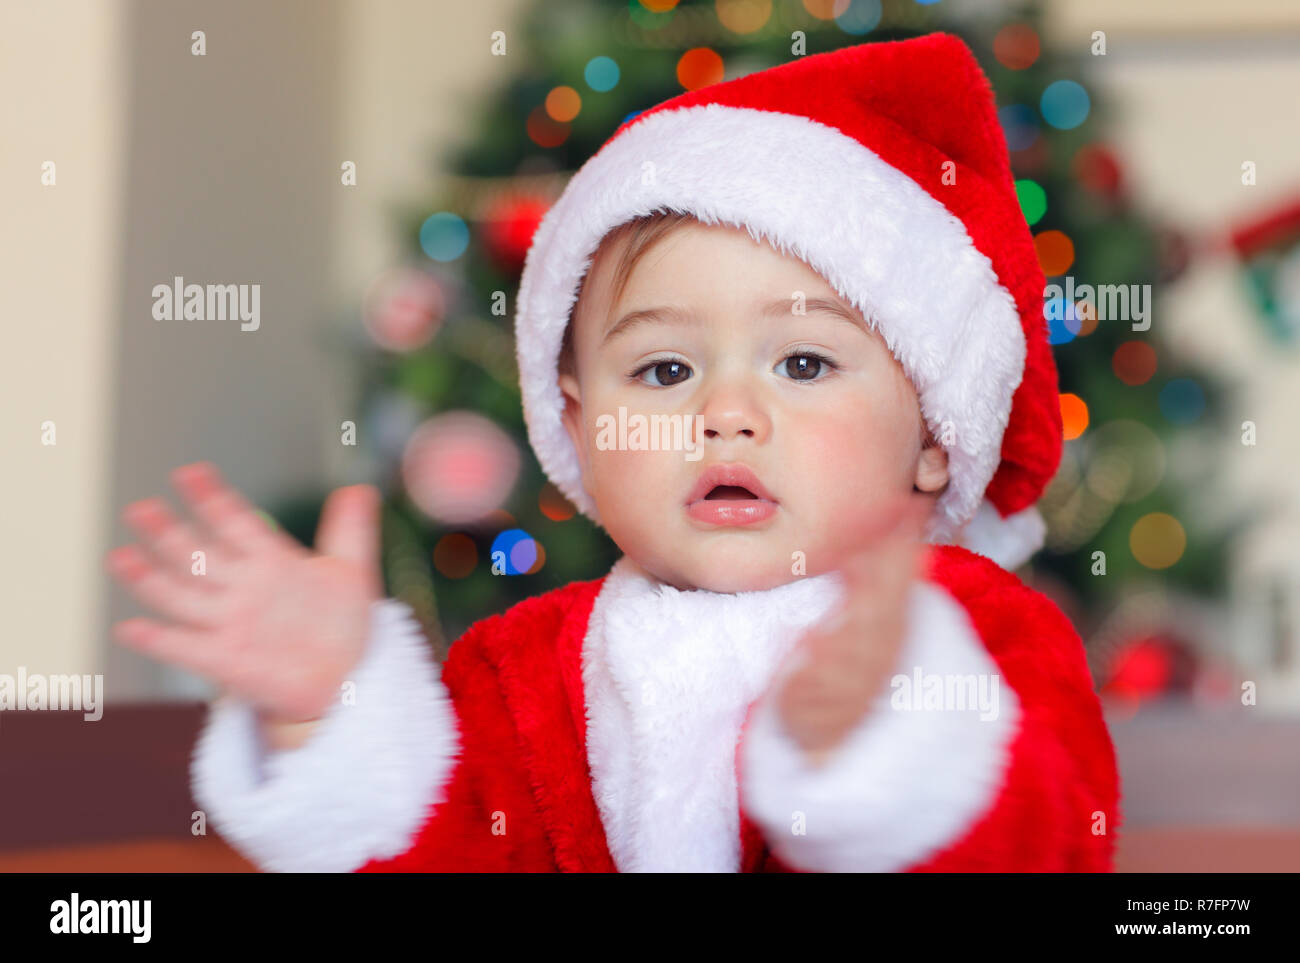 Holiday background with cute Santa Claus Christmas tree decorative ornament  & gift box in snow over abstract defocus lights | Stock image | Colourbox